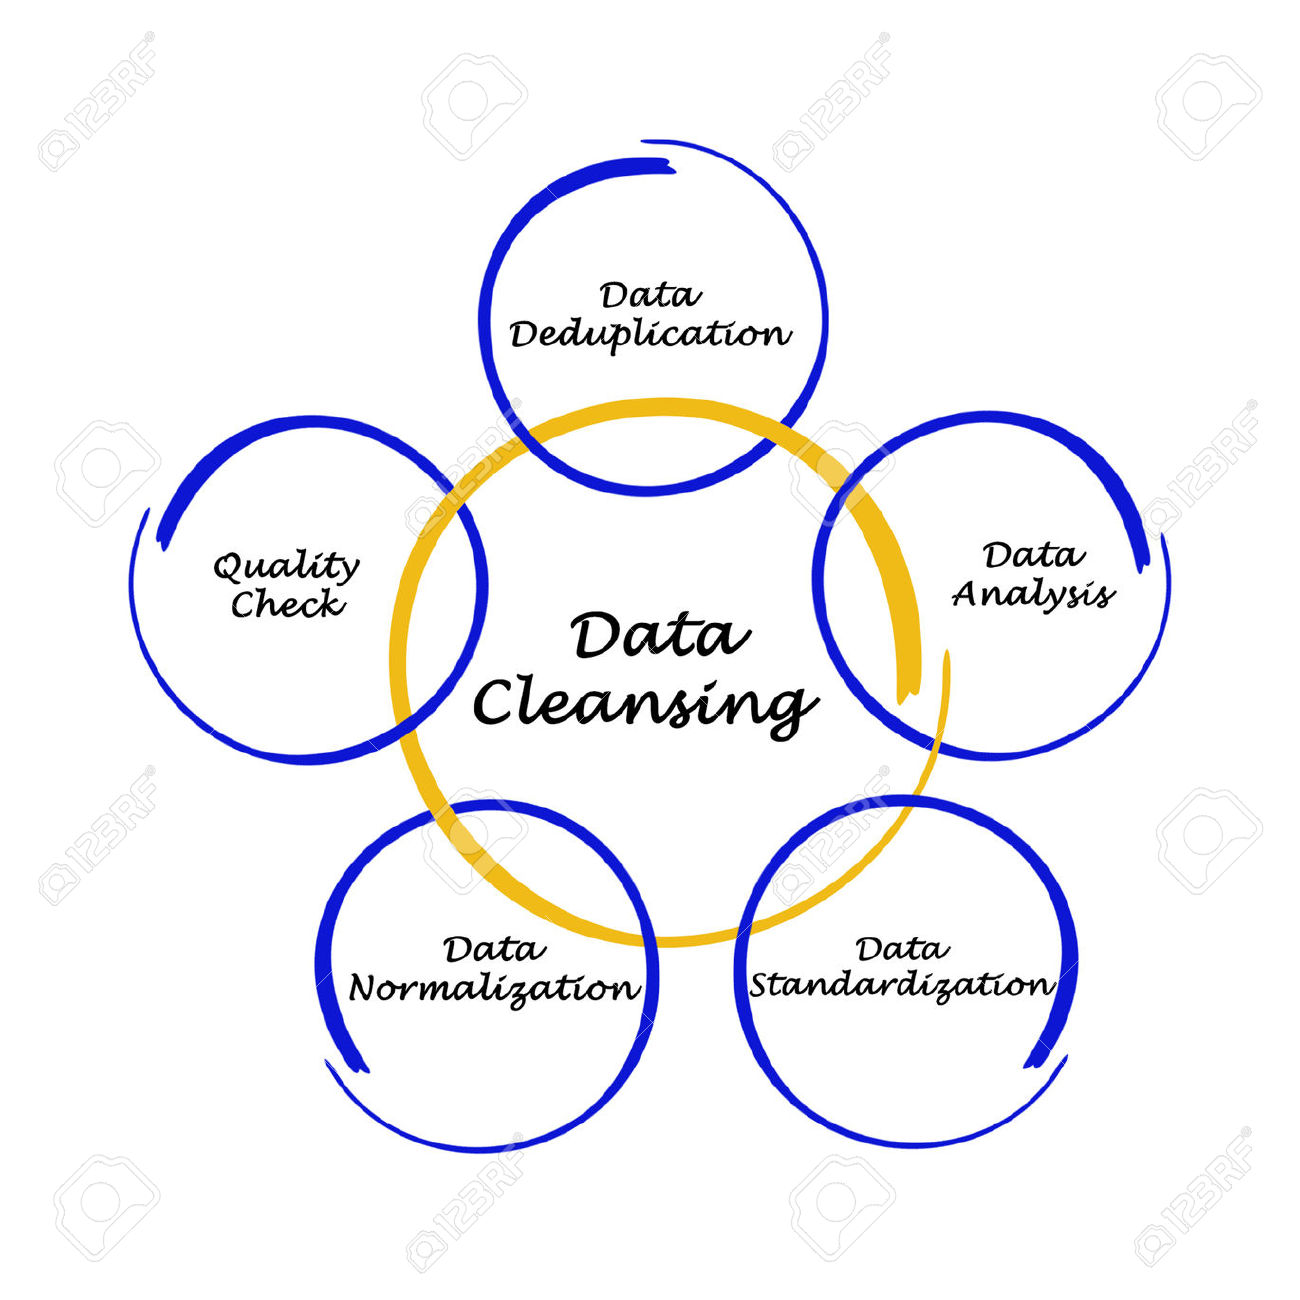 Cause Marketing: The Impact of Data Cleansing on your Marketing and Fundraising Efforts